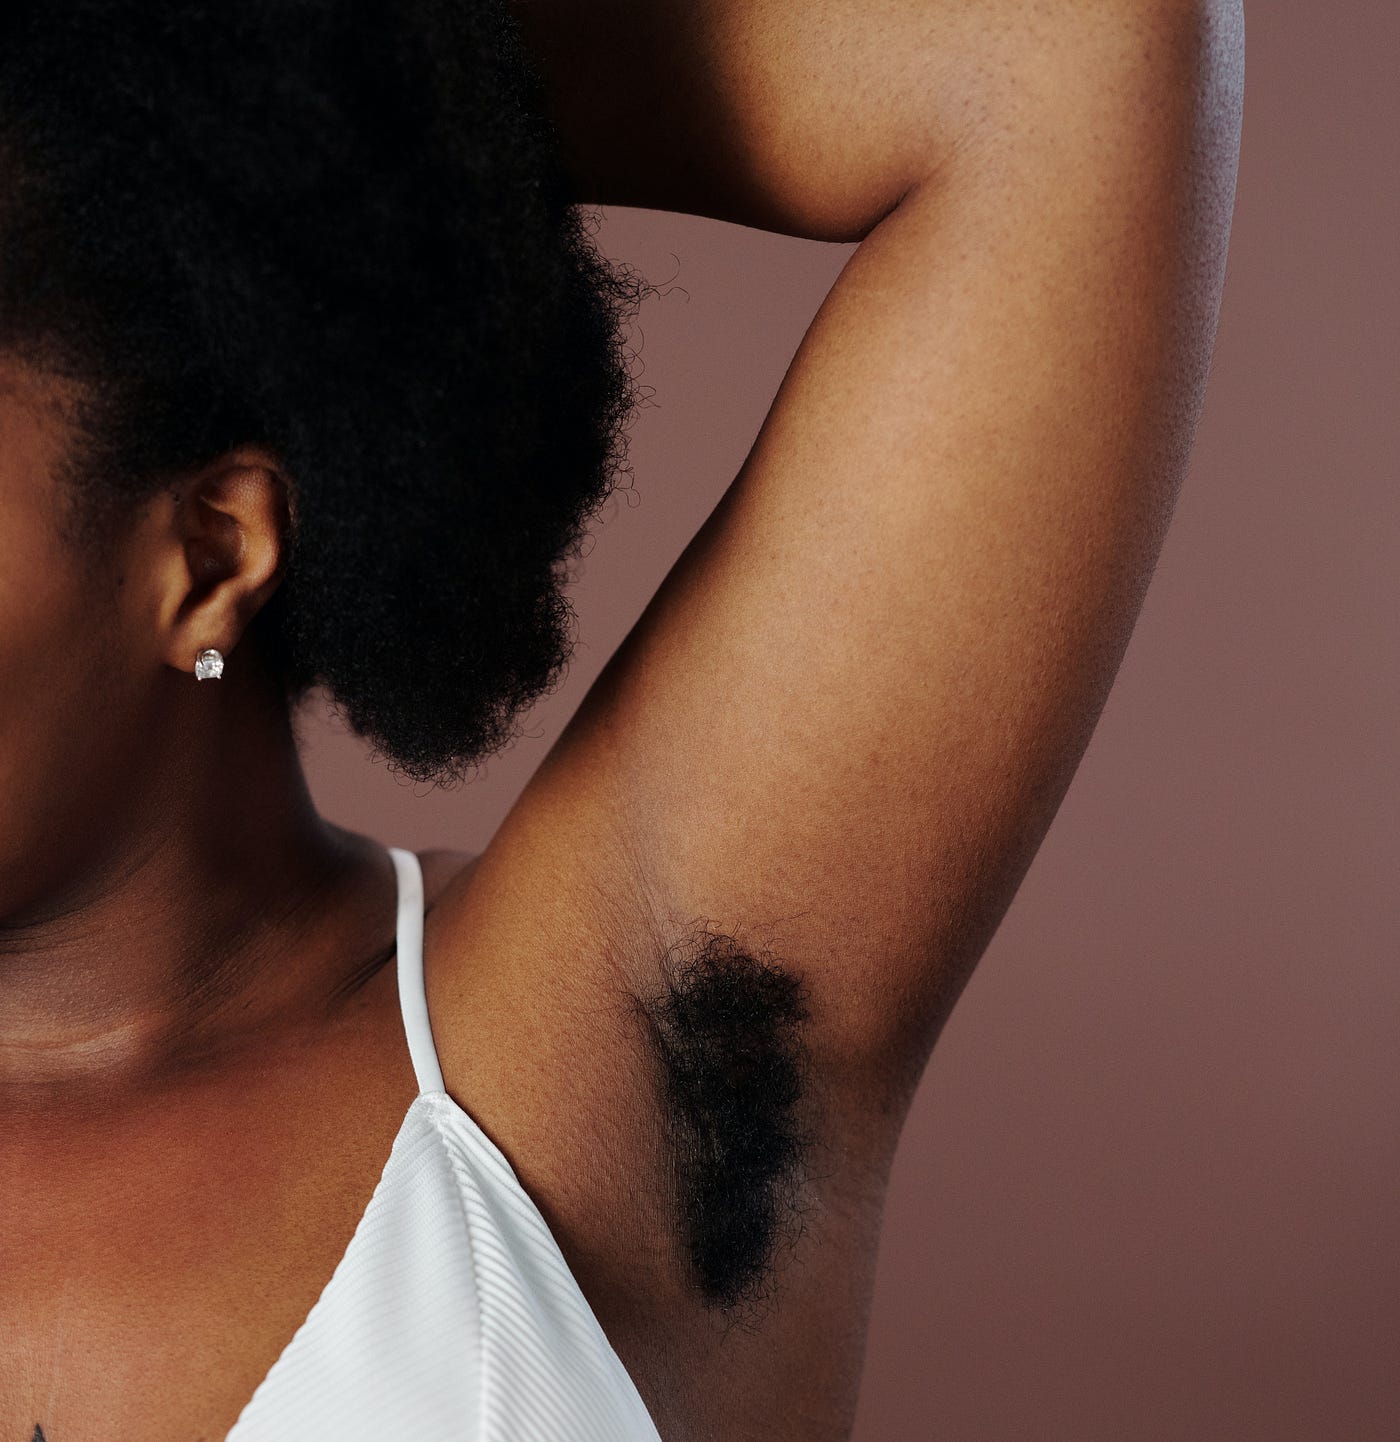 How is “hairiness” encoded in your DNA? by Genomelink Genomelink Medium